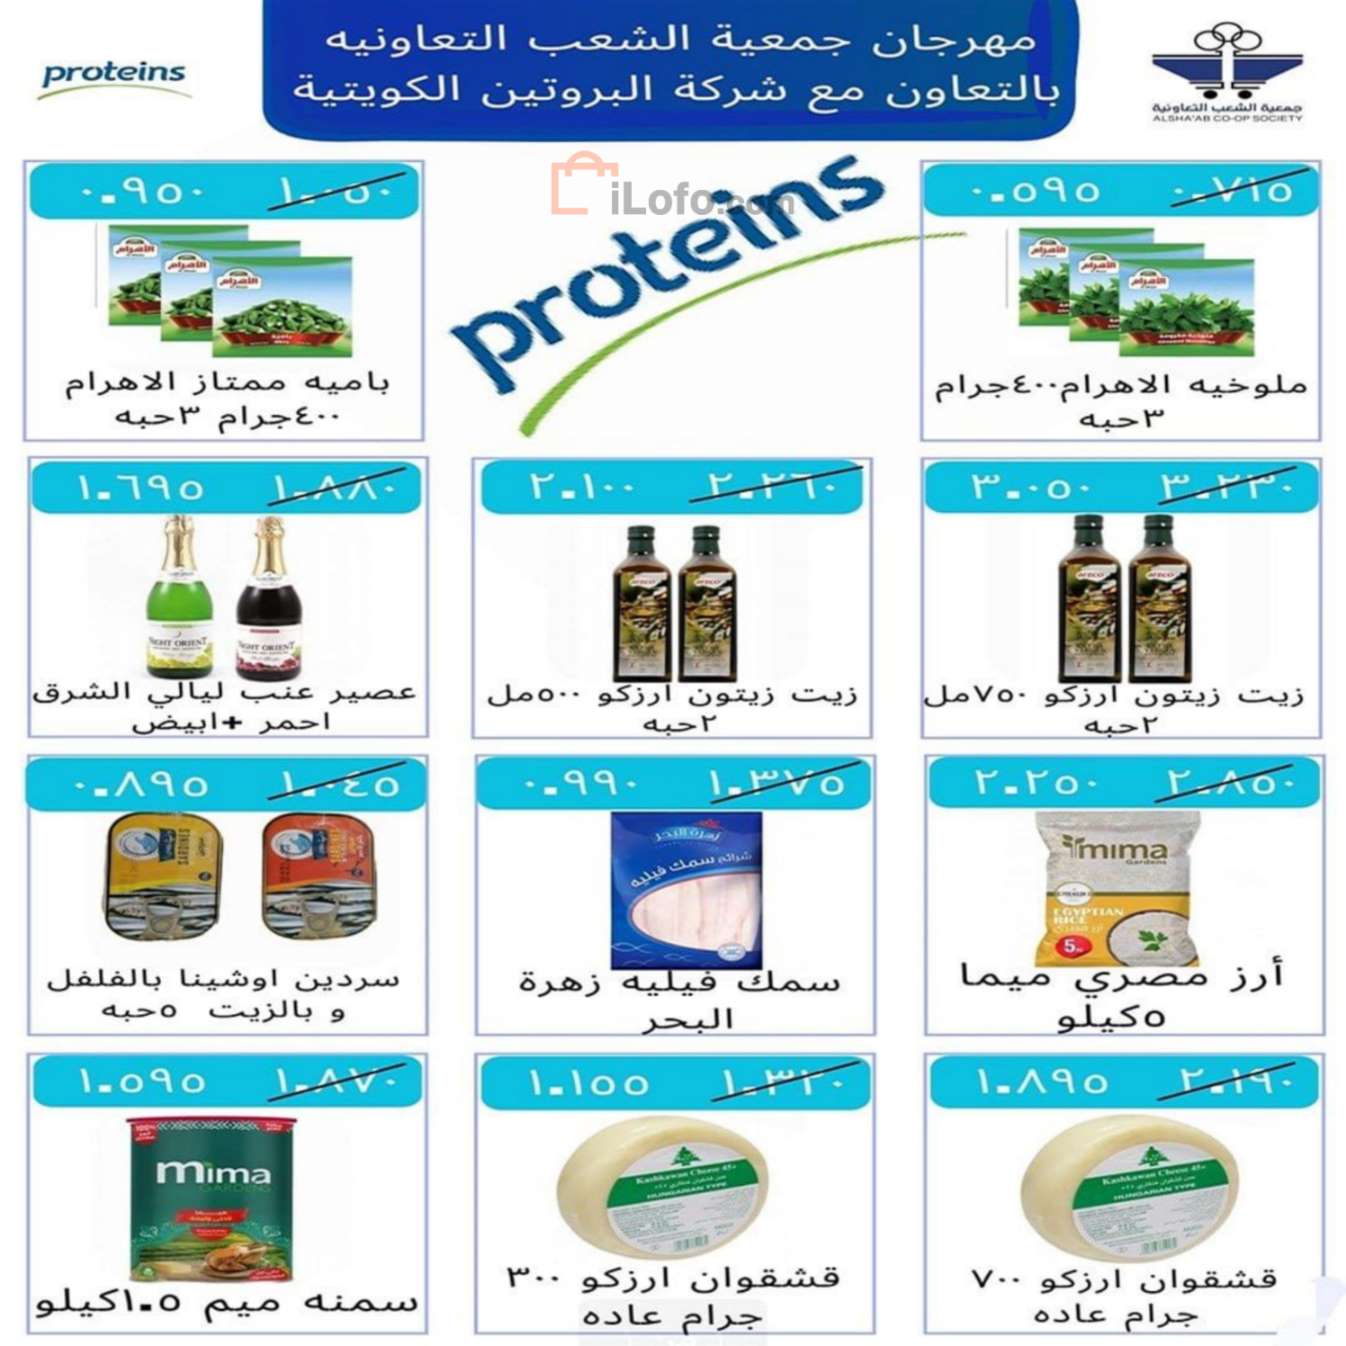 Page 29 at Central Market offers at Al Shaab co-op Kuwait Society